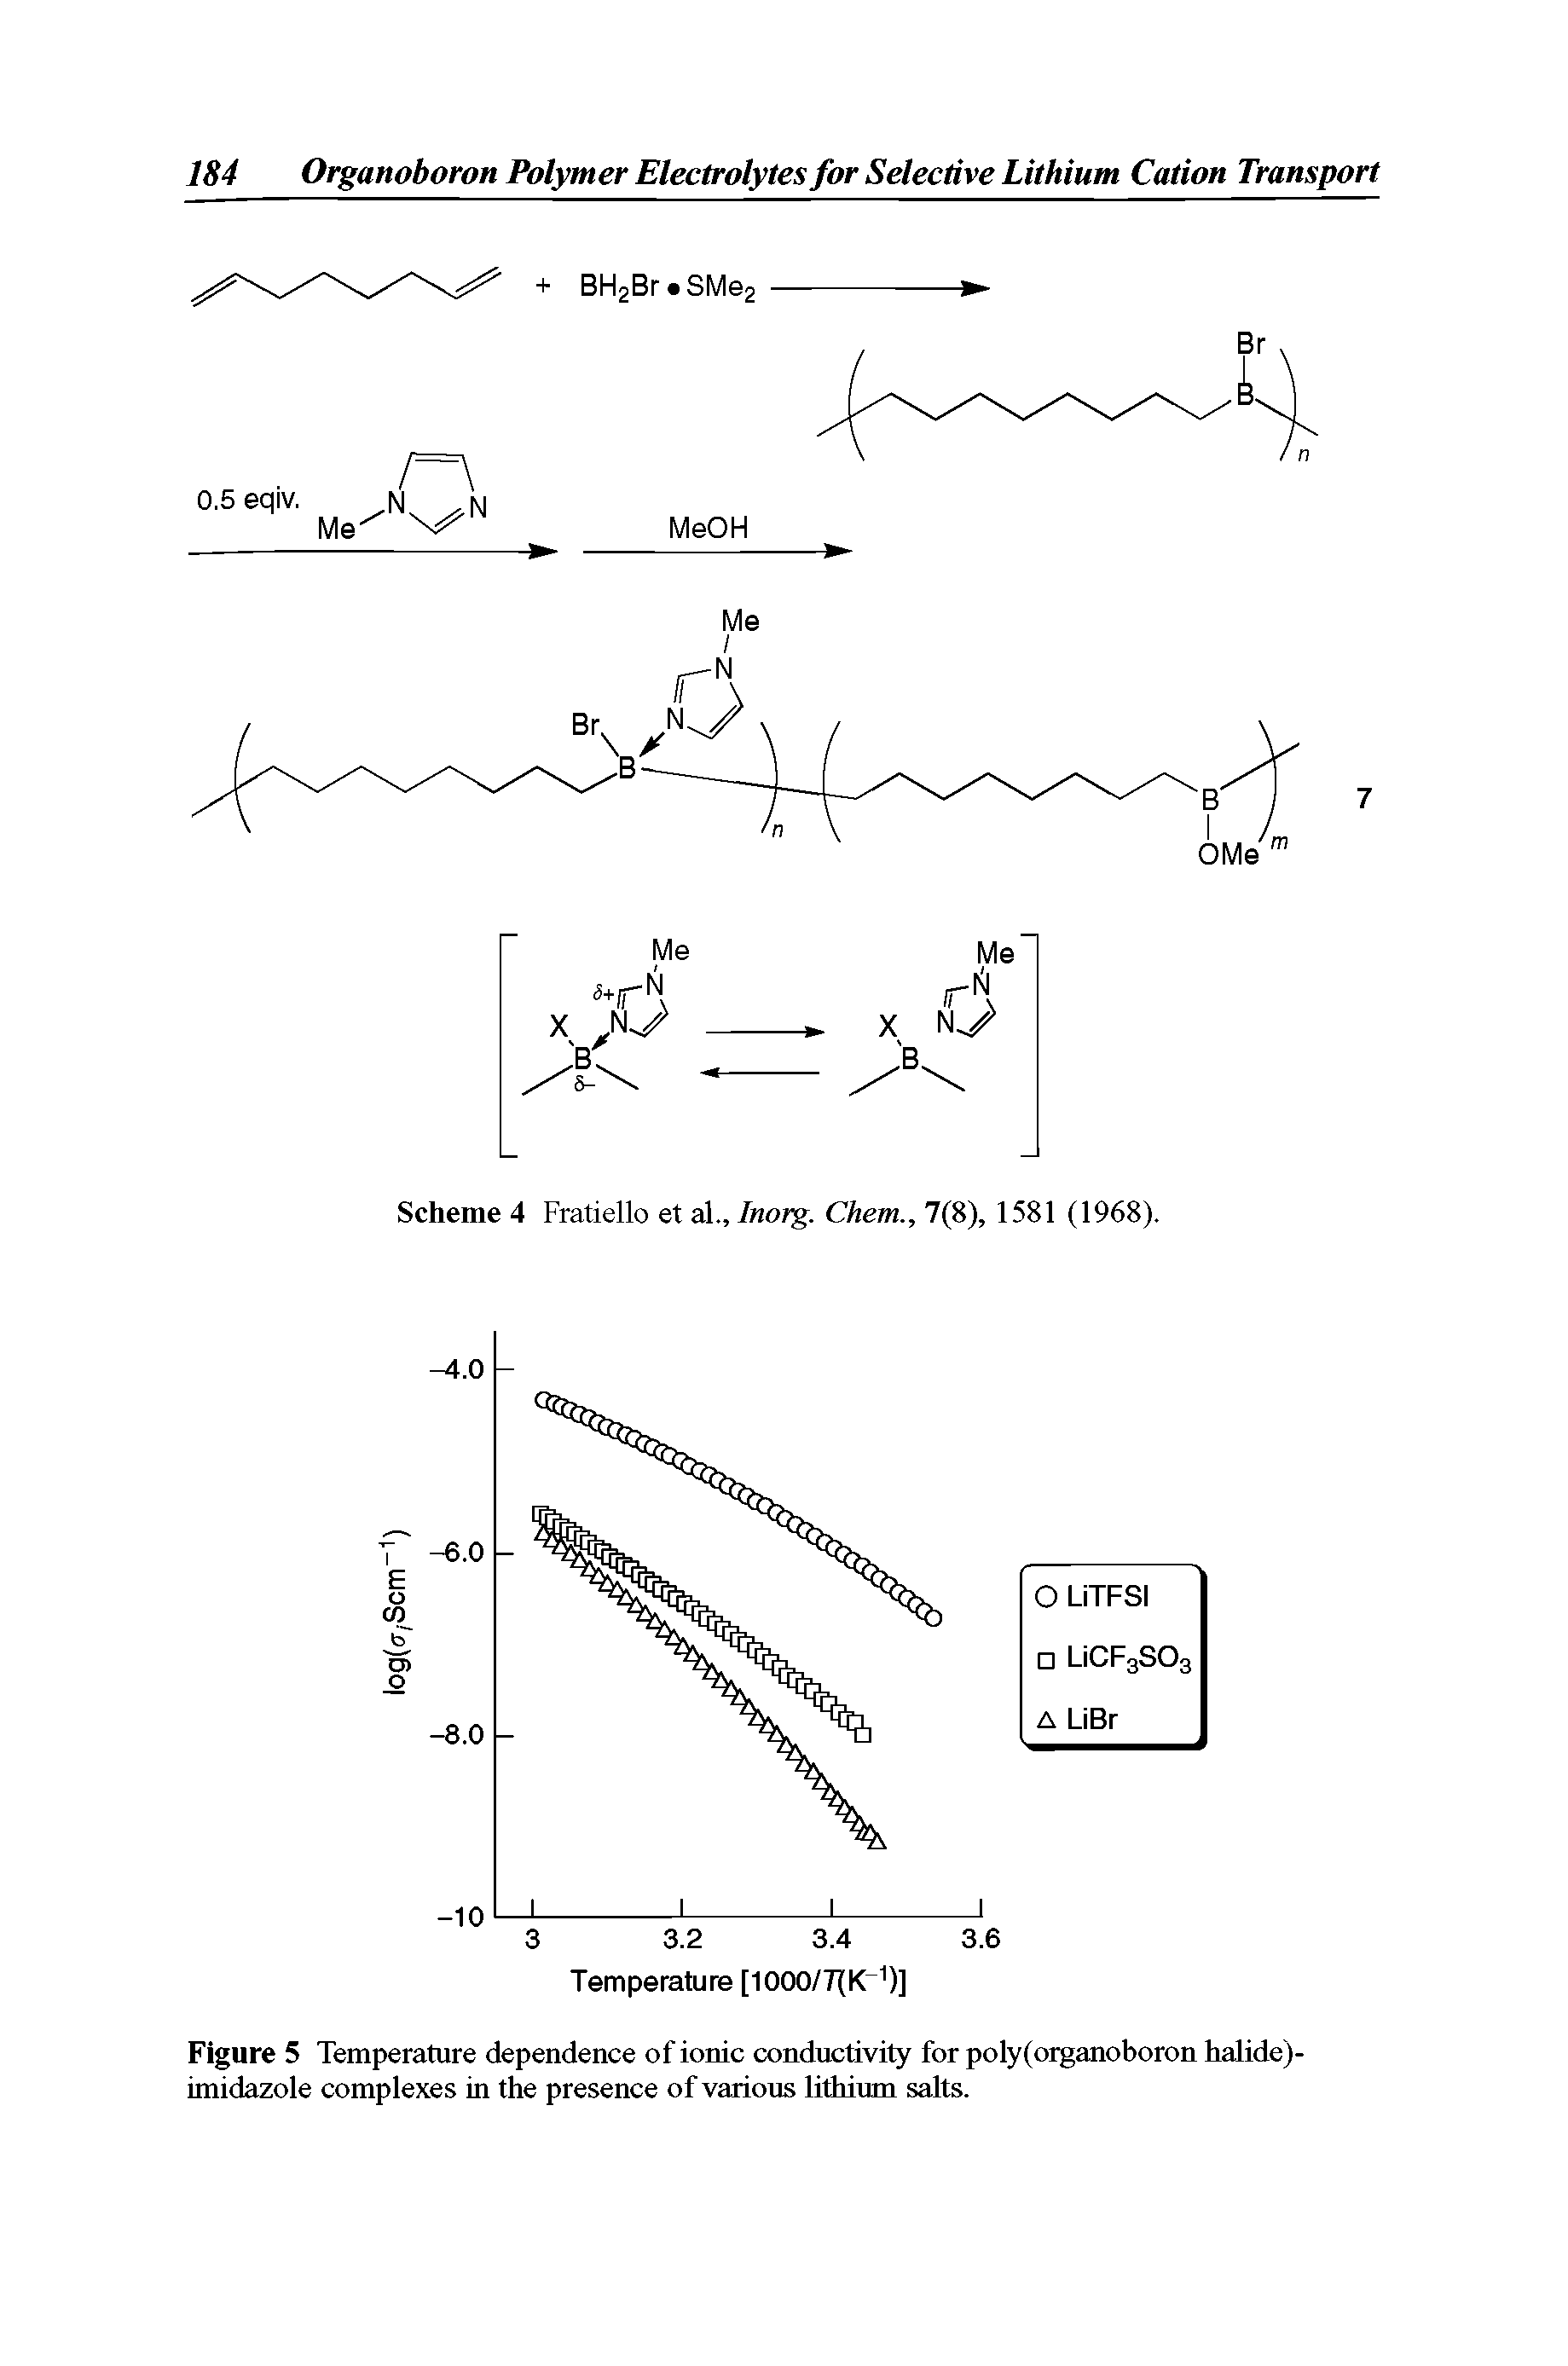 Figure 5 Temperature dependence of ionic conductivity for poly(organoboron halide)-imidazole complexes in the presence of various lithium salts.